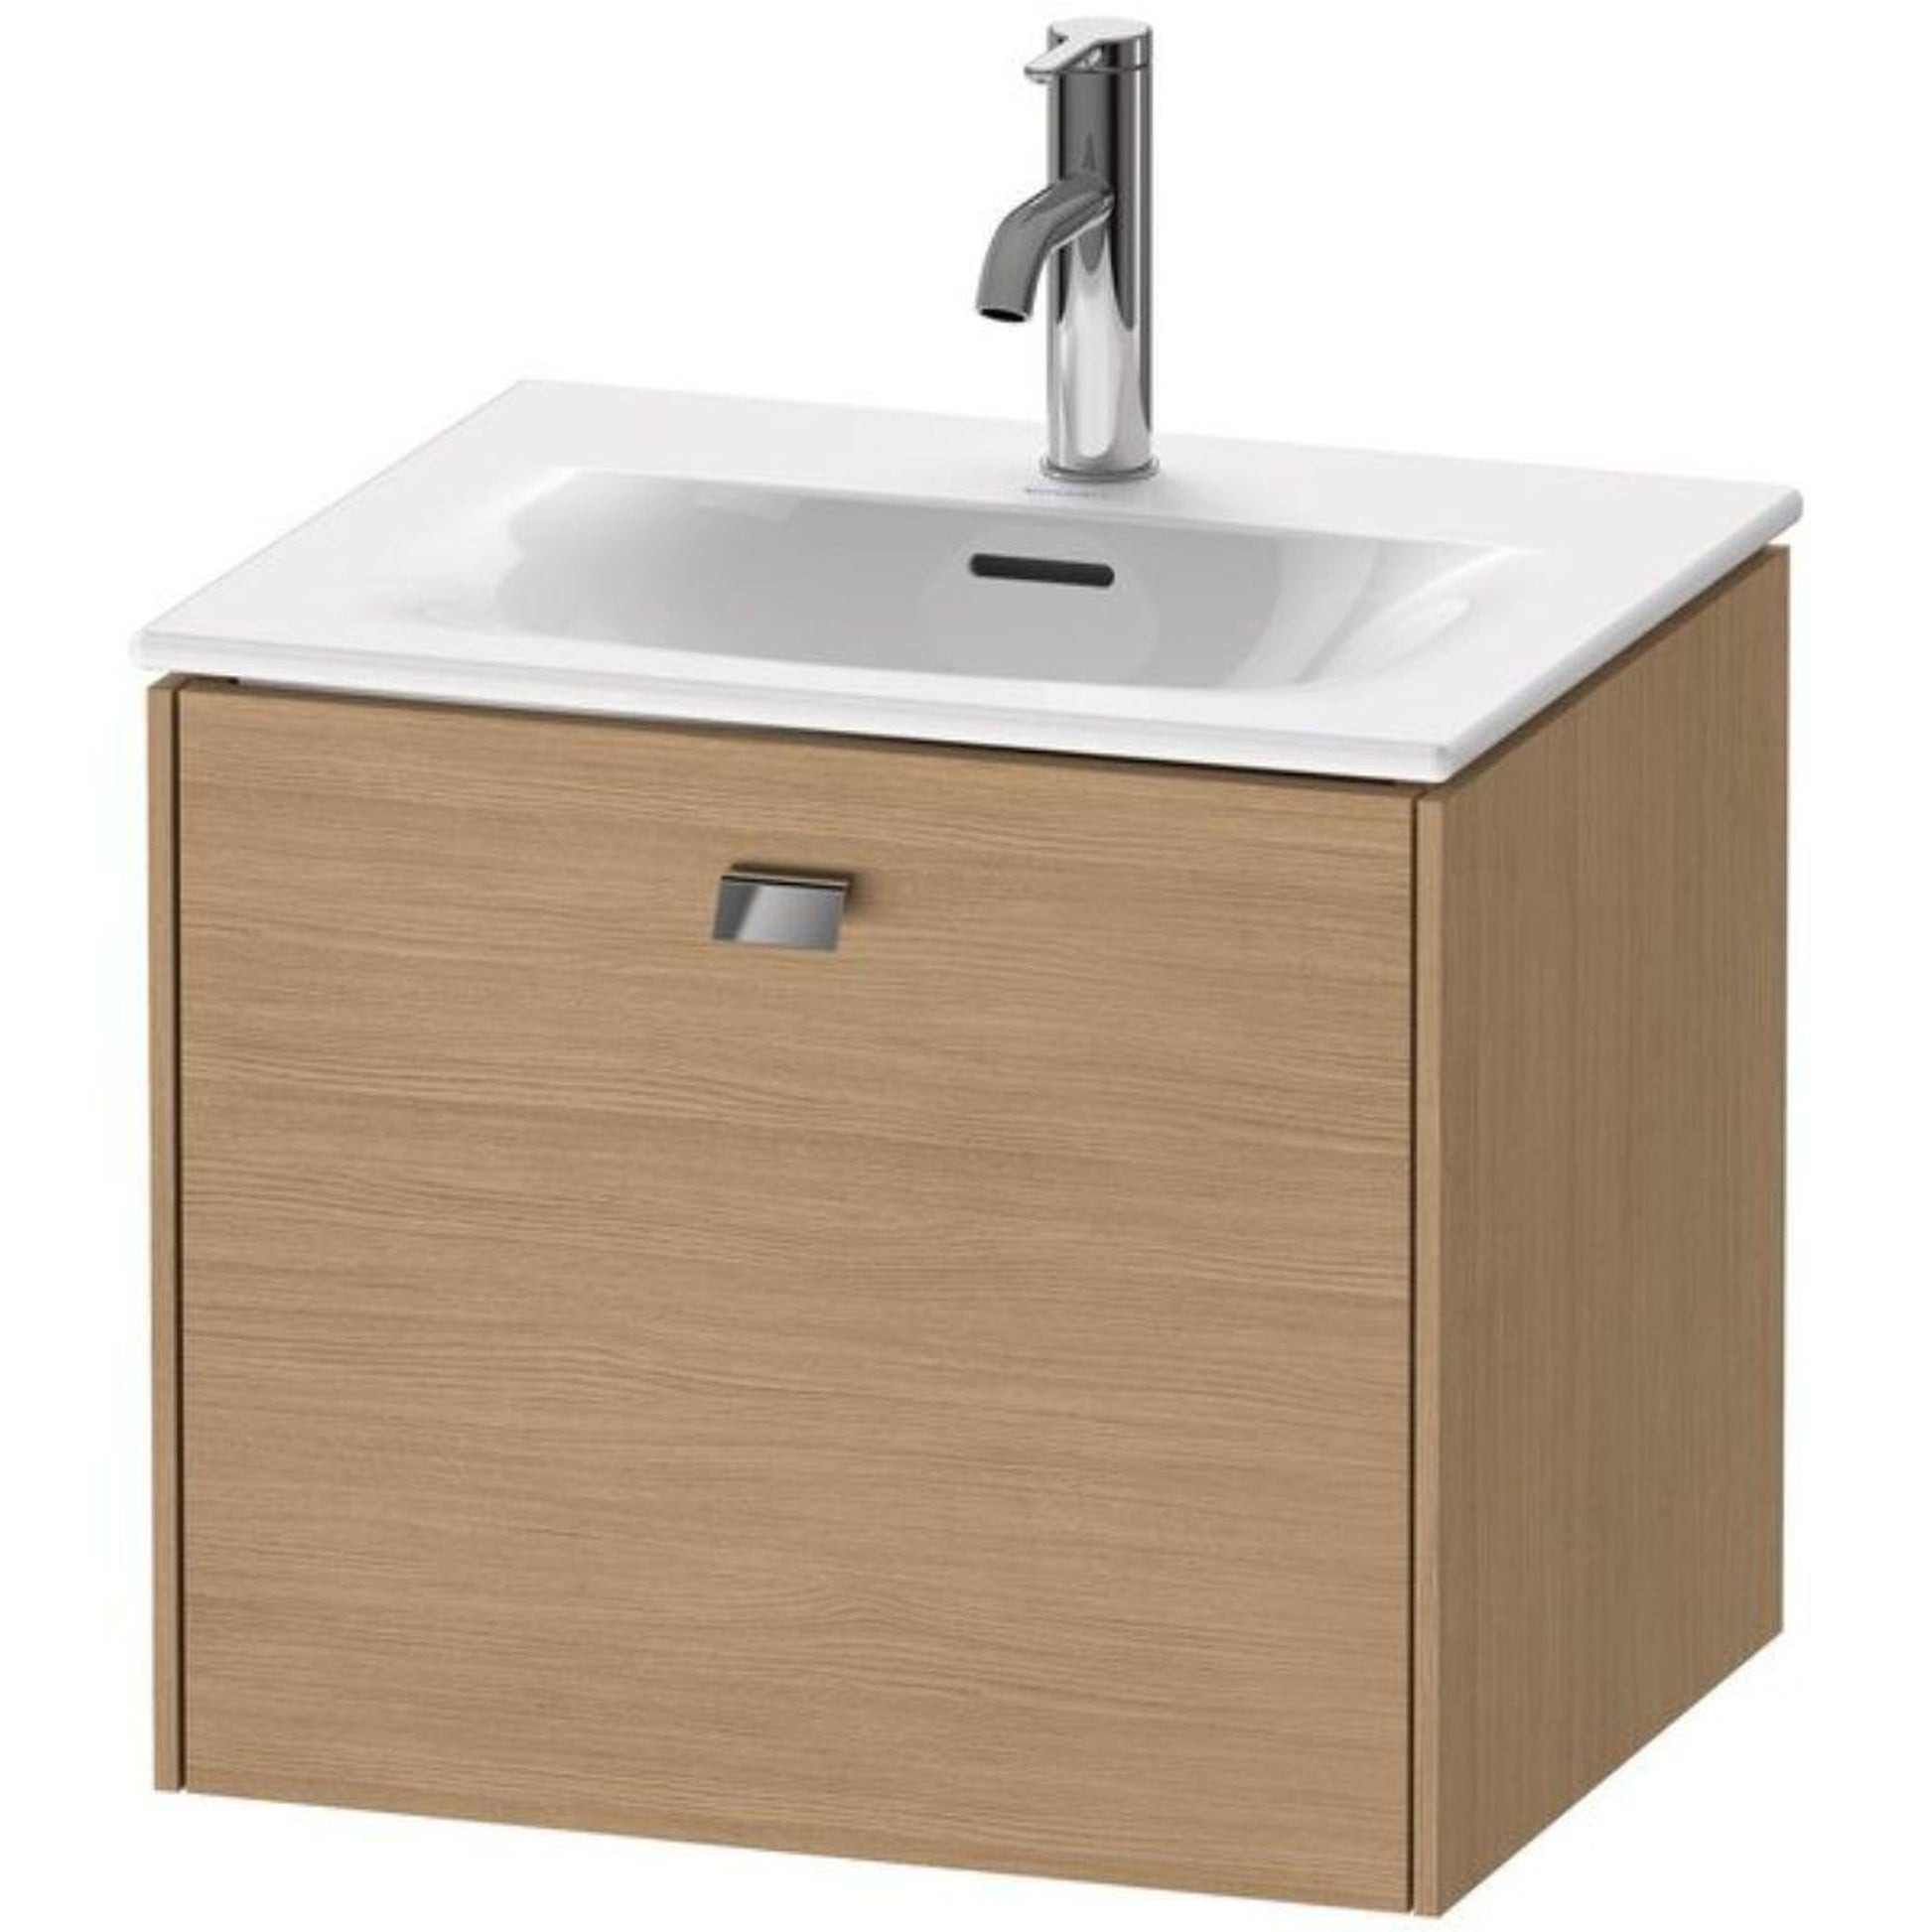 Duravit Brioso BR42090 20" x 17" x 16" One Drawer Wall-Mount Vanity Unit in European Oak and Chrome Handle